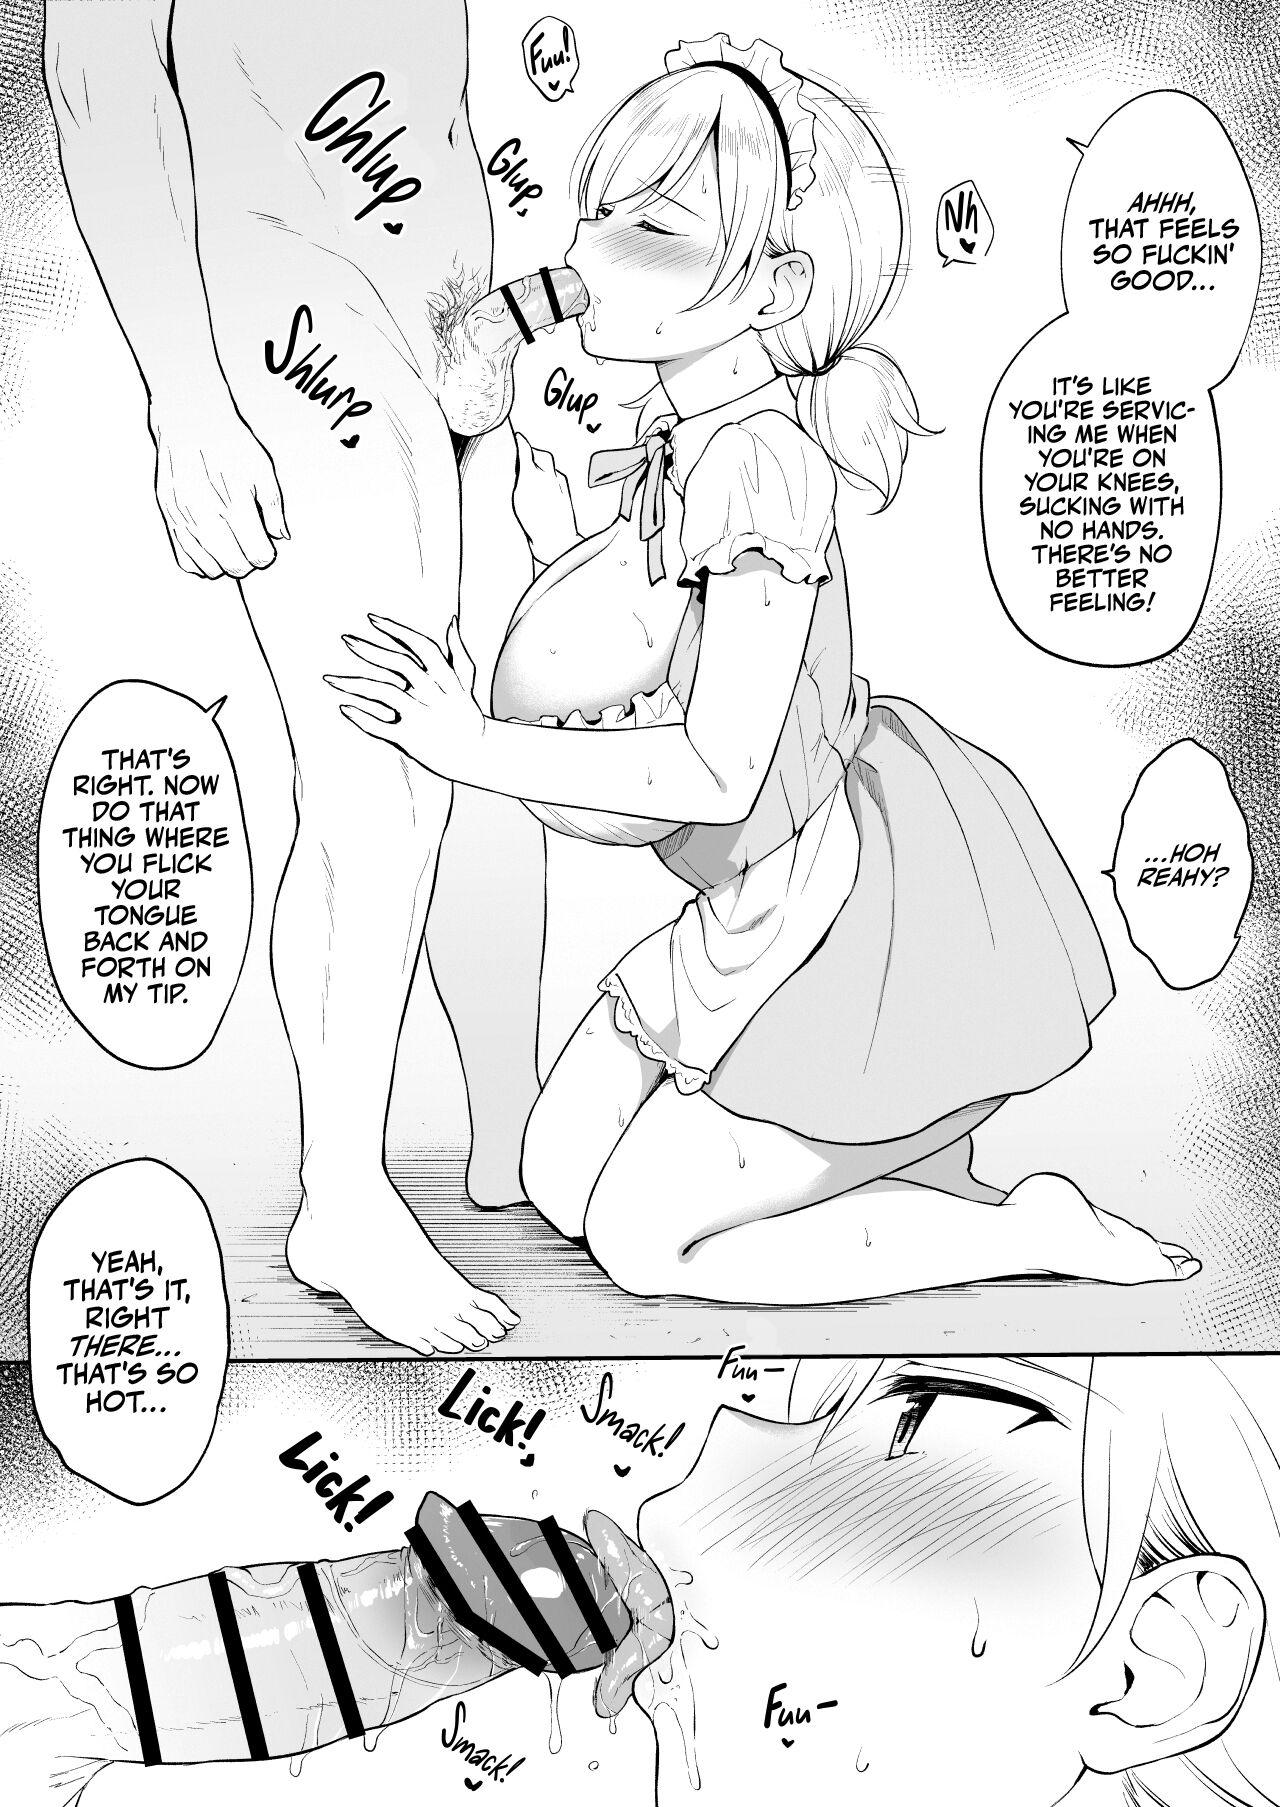 Bunda Grande Shinyuu no Imouto ni Donki no Maid Fuku o Kisete Cosplay Ecchi | Cosplay Sex with My Best Friend's Little Sister Who's Wearing A Maid Outfit from Donki - Original Punished - Page 4